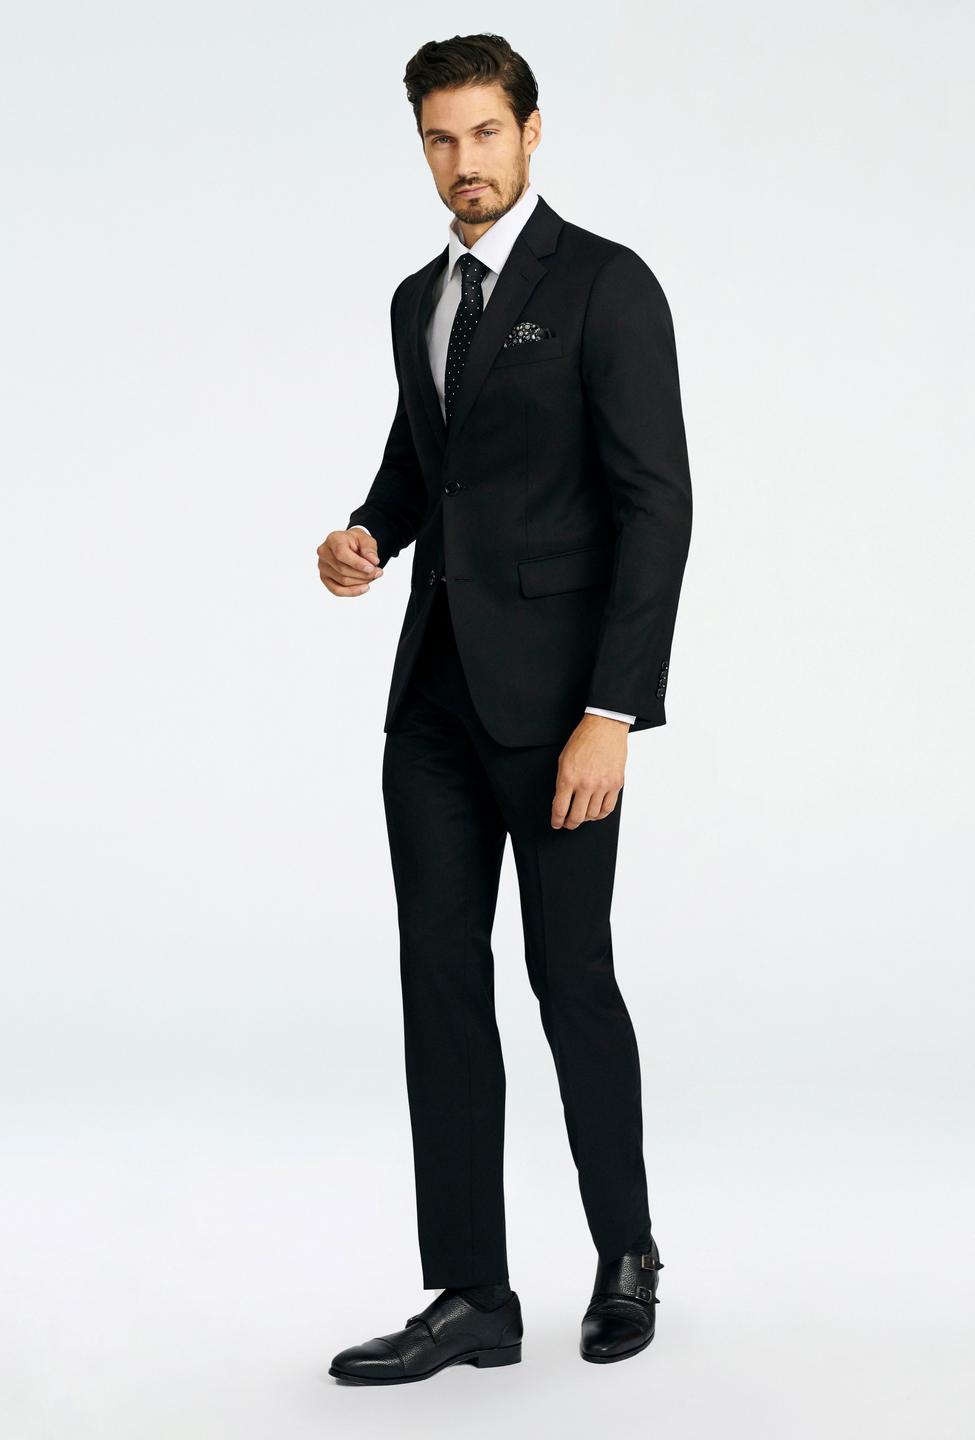 Black suit - Hereford Solid Design from Premium Indochino Collection